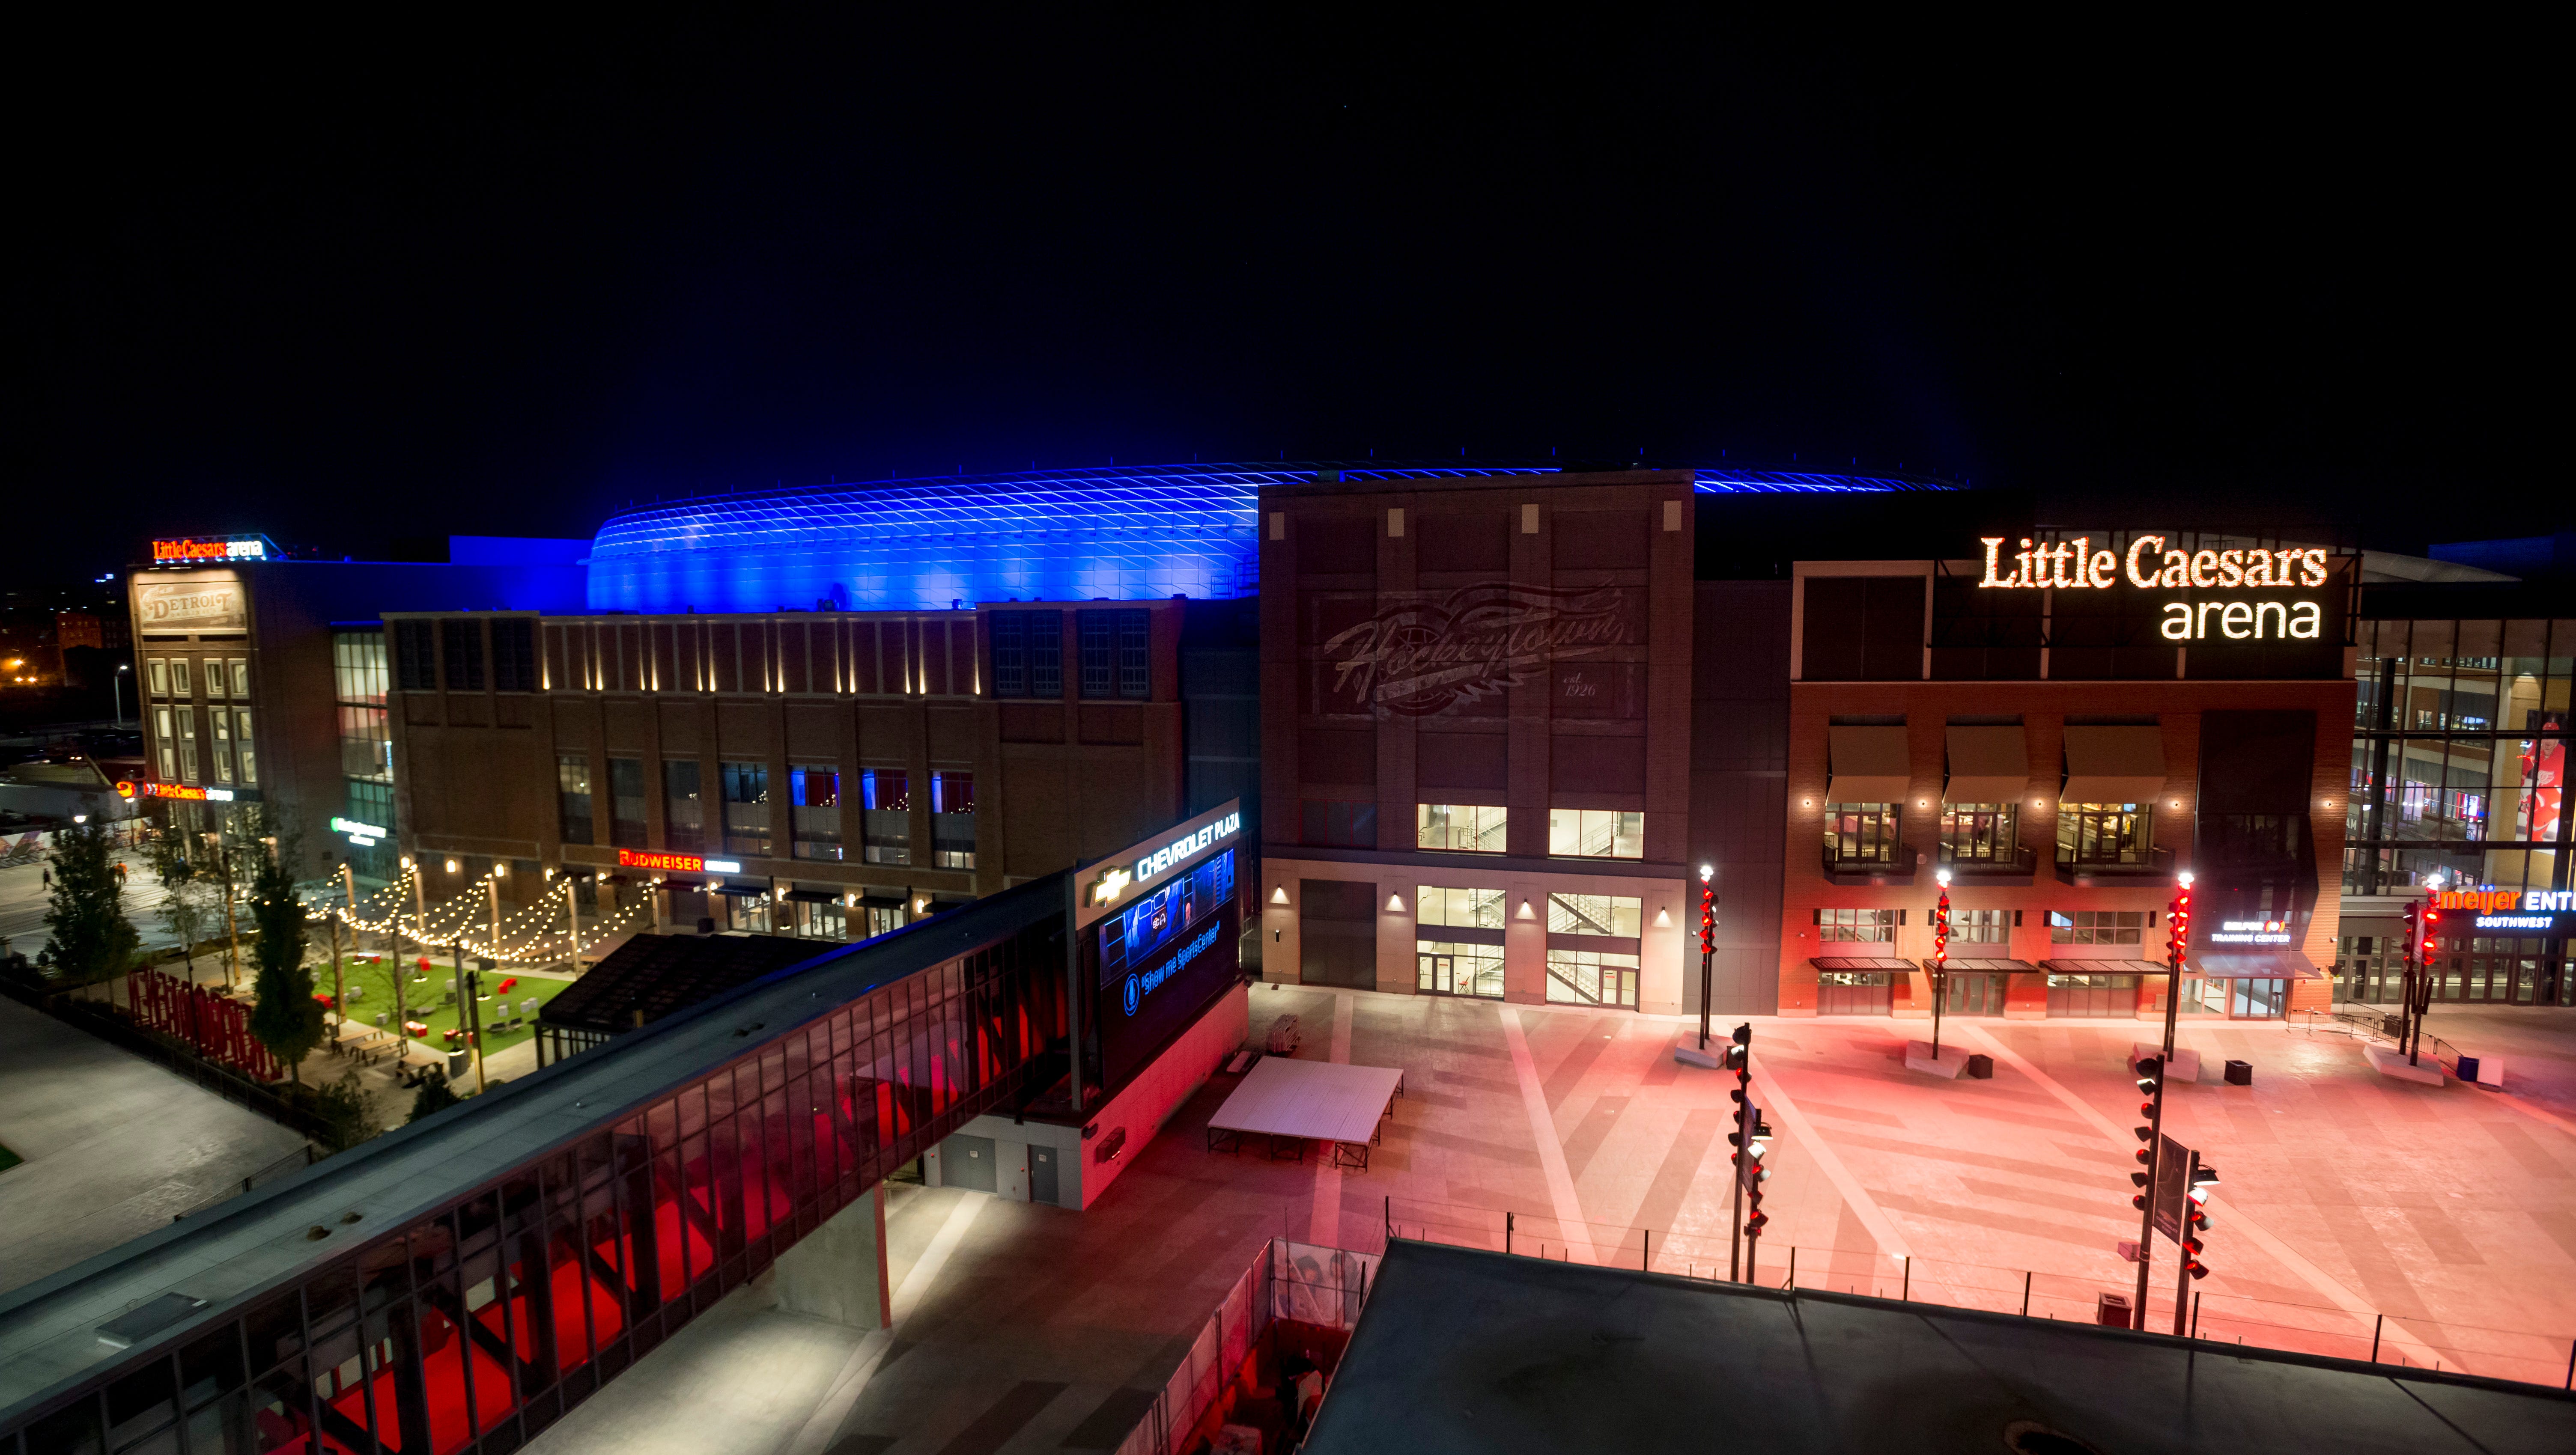 Little Caesars Arena is lit up at night after a recent preseason hockey game.